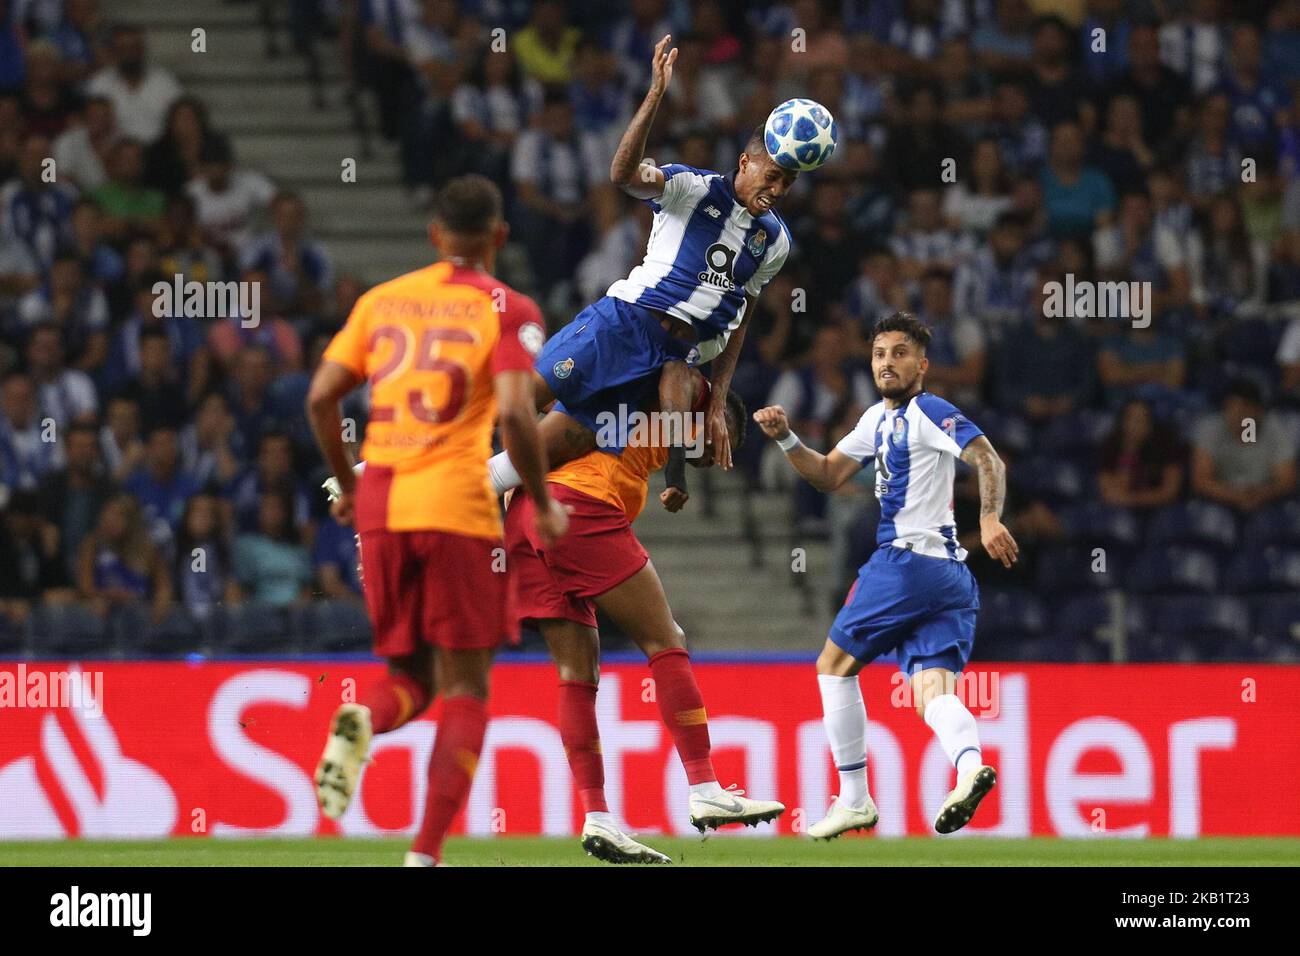 Porto's Brazilian defender Eder Militao in action during the UEFA Champions League, match between FC Porto and Galatasaray, at Dragao Stadium in Porto on October 3, 2018 in Porto, Portugal. (Photo by Paulo Oliveira / DPI / NurPhoto) Stock Photo